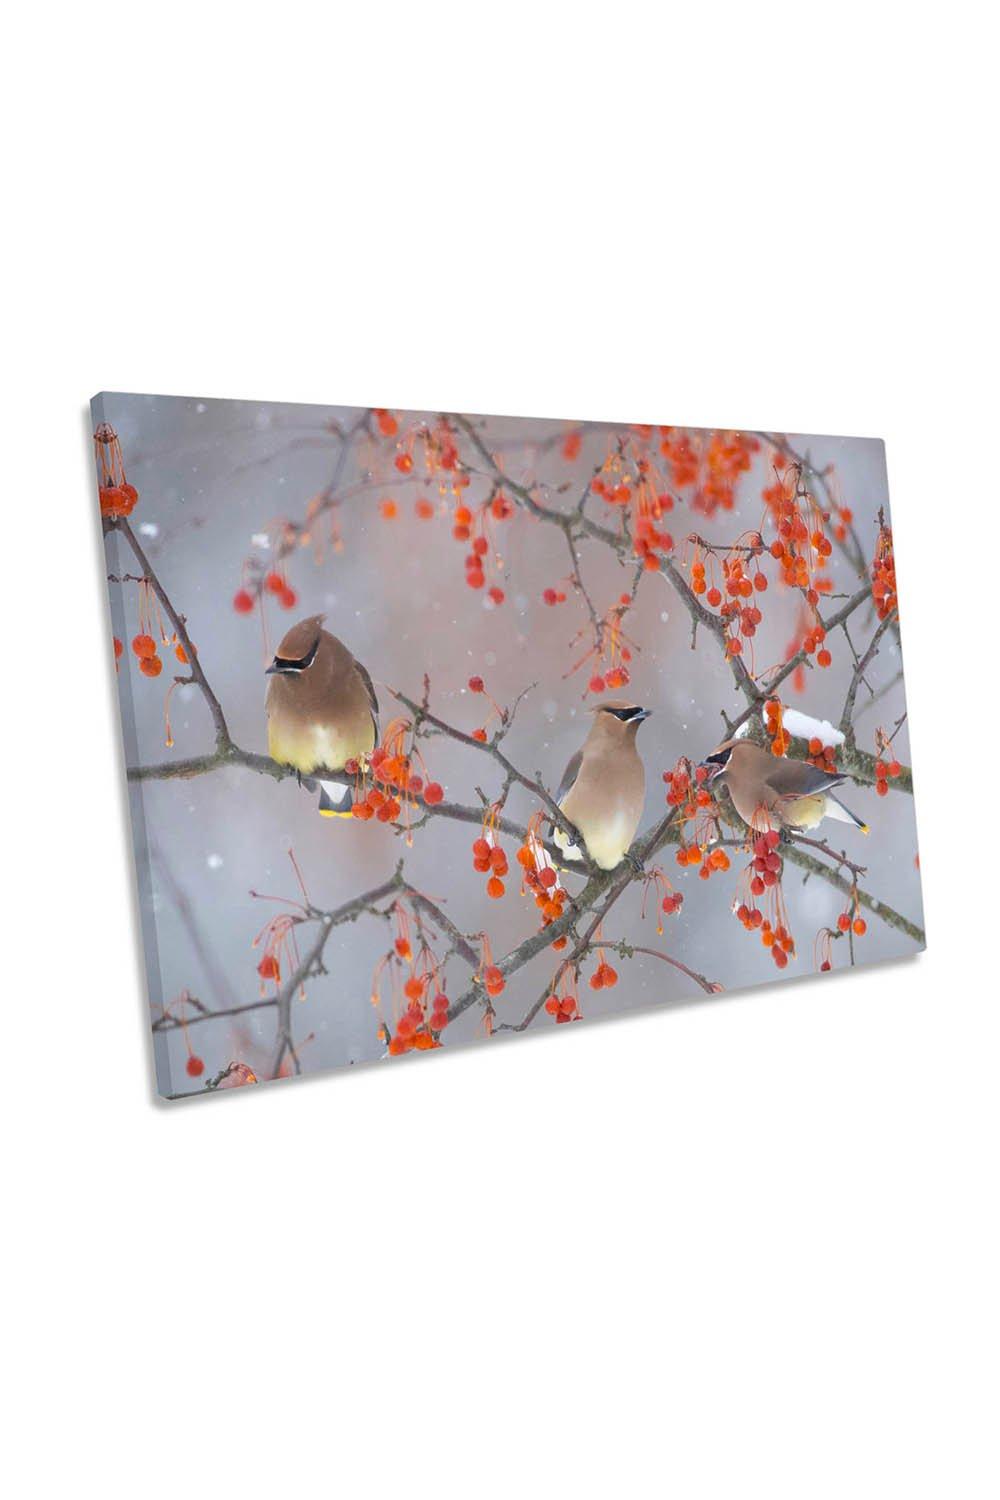 Birds in a Red Tree Branch Canvas Wall Art Picture Print